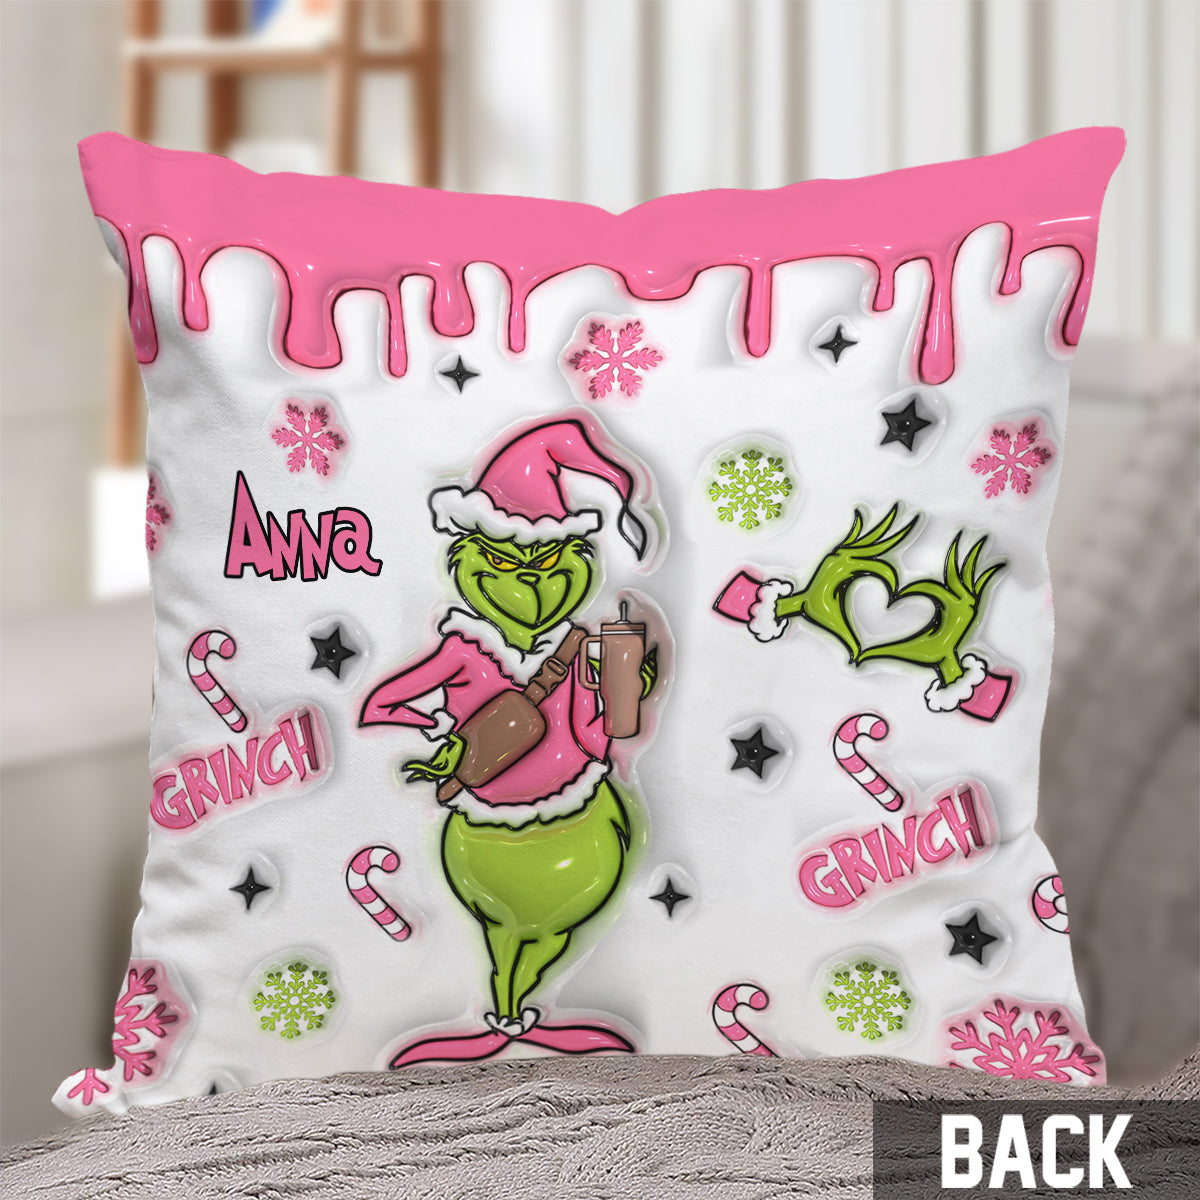 I'm Booked - Personalized Stole Christmas Throw Pillow